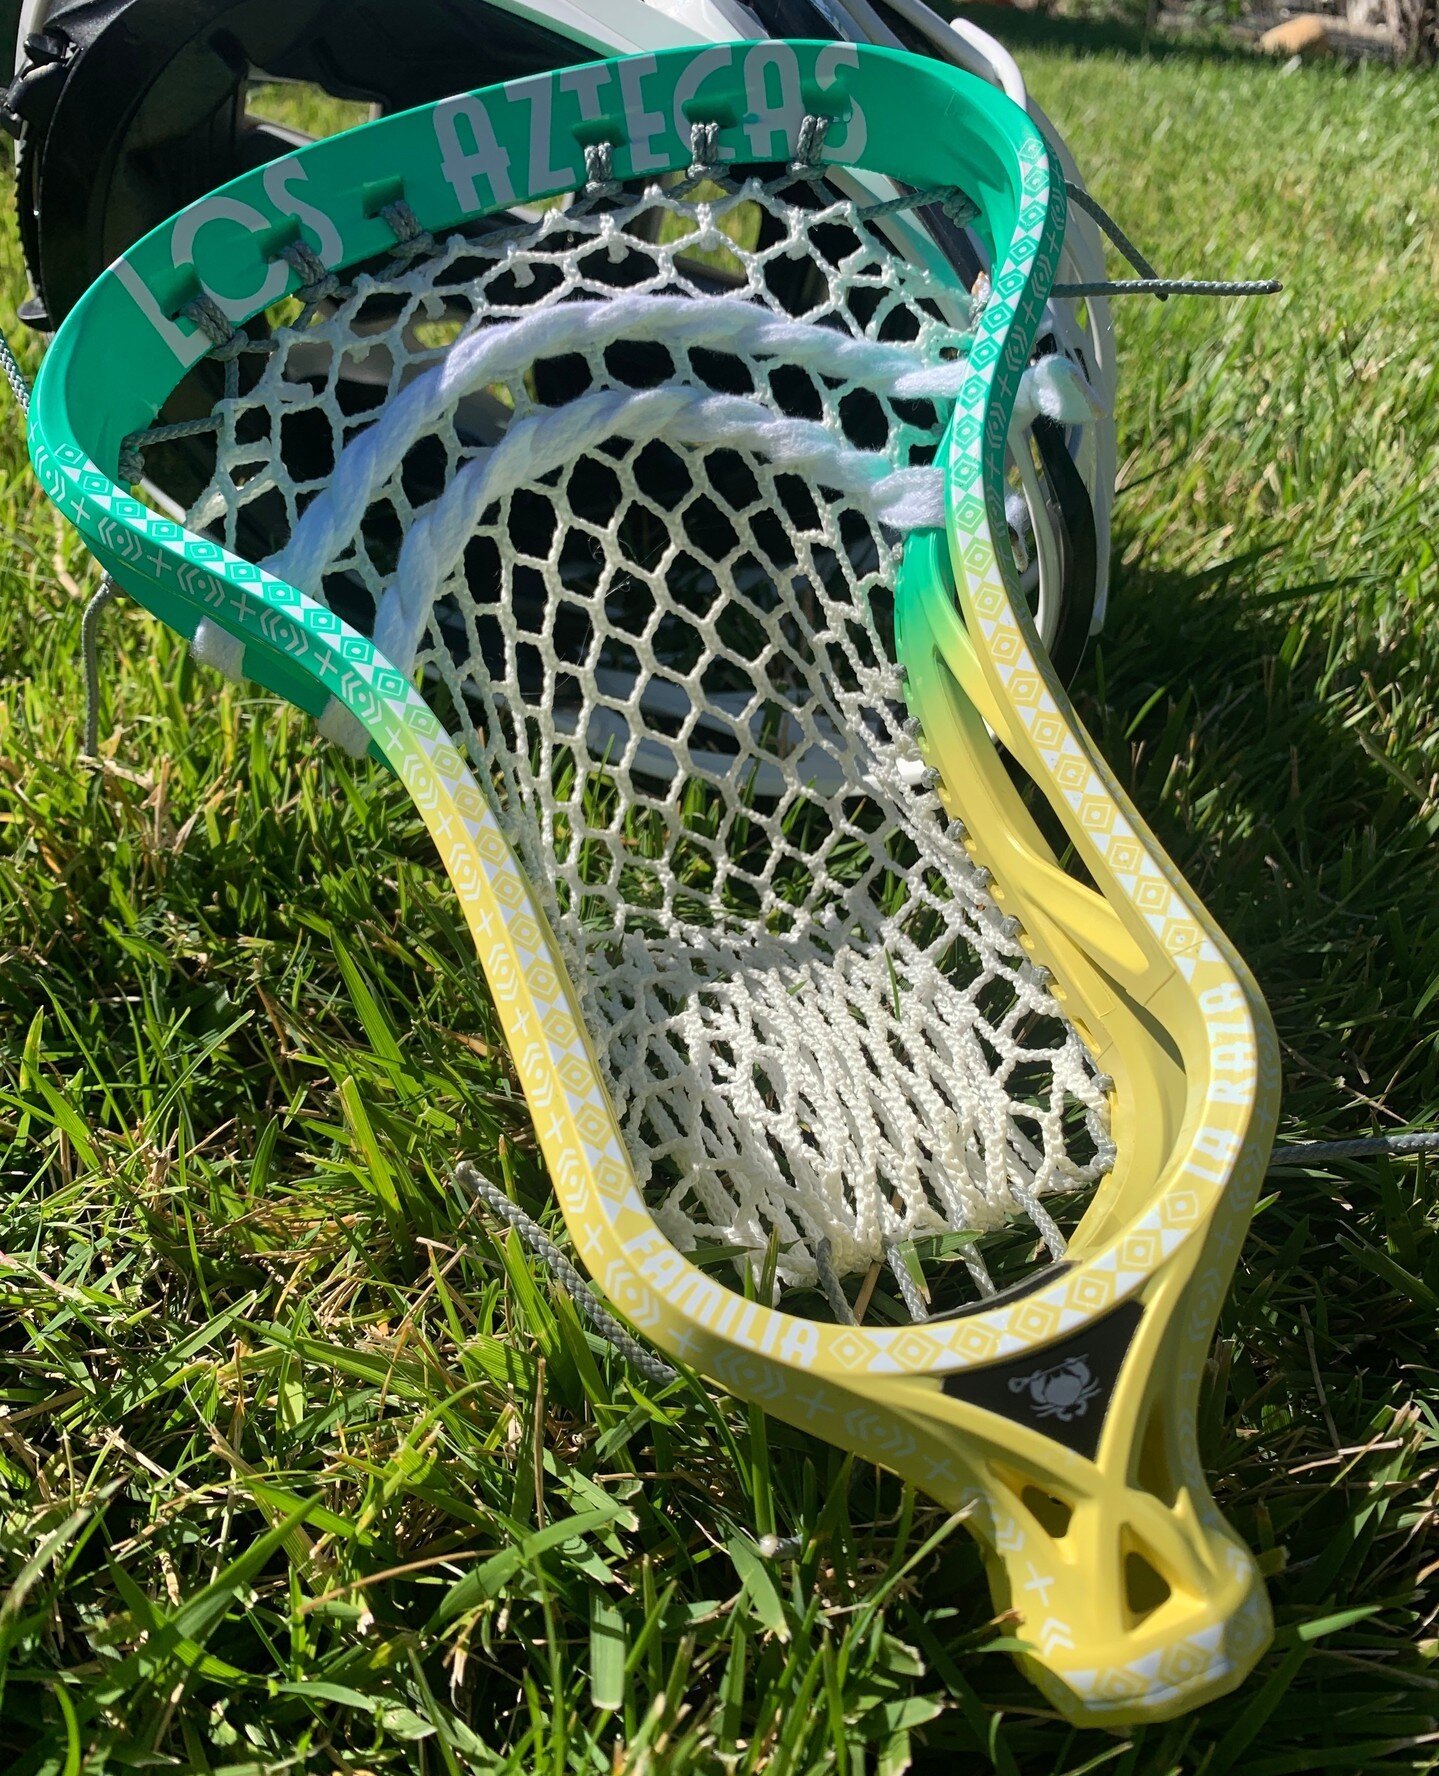 @losaztecaslax themed @ecdlax Mirage 2.0 for @melgoza8. Tied up with Hero 3 and @jimlaxhq sidewall and shooters.⁠
⁠
🎨 Dipped in @laxdipdye Mint and @ritdye Golden Yellow⁠
⁠
#nsalax #nsastrung #customstrung #norcallax #bayarealax #lax #lacrosse #laxs